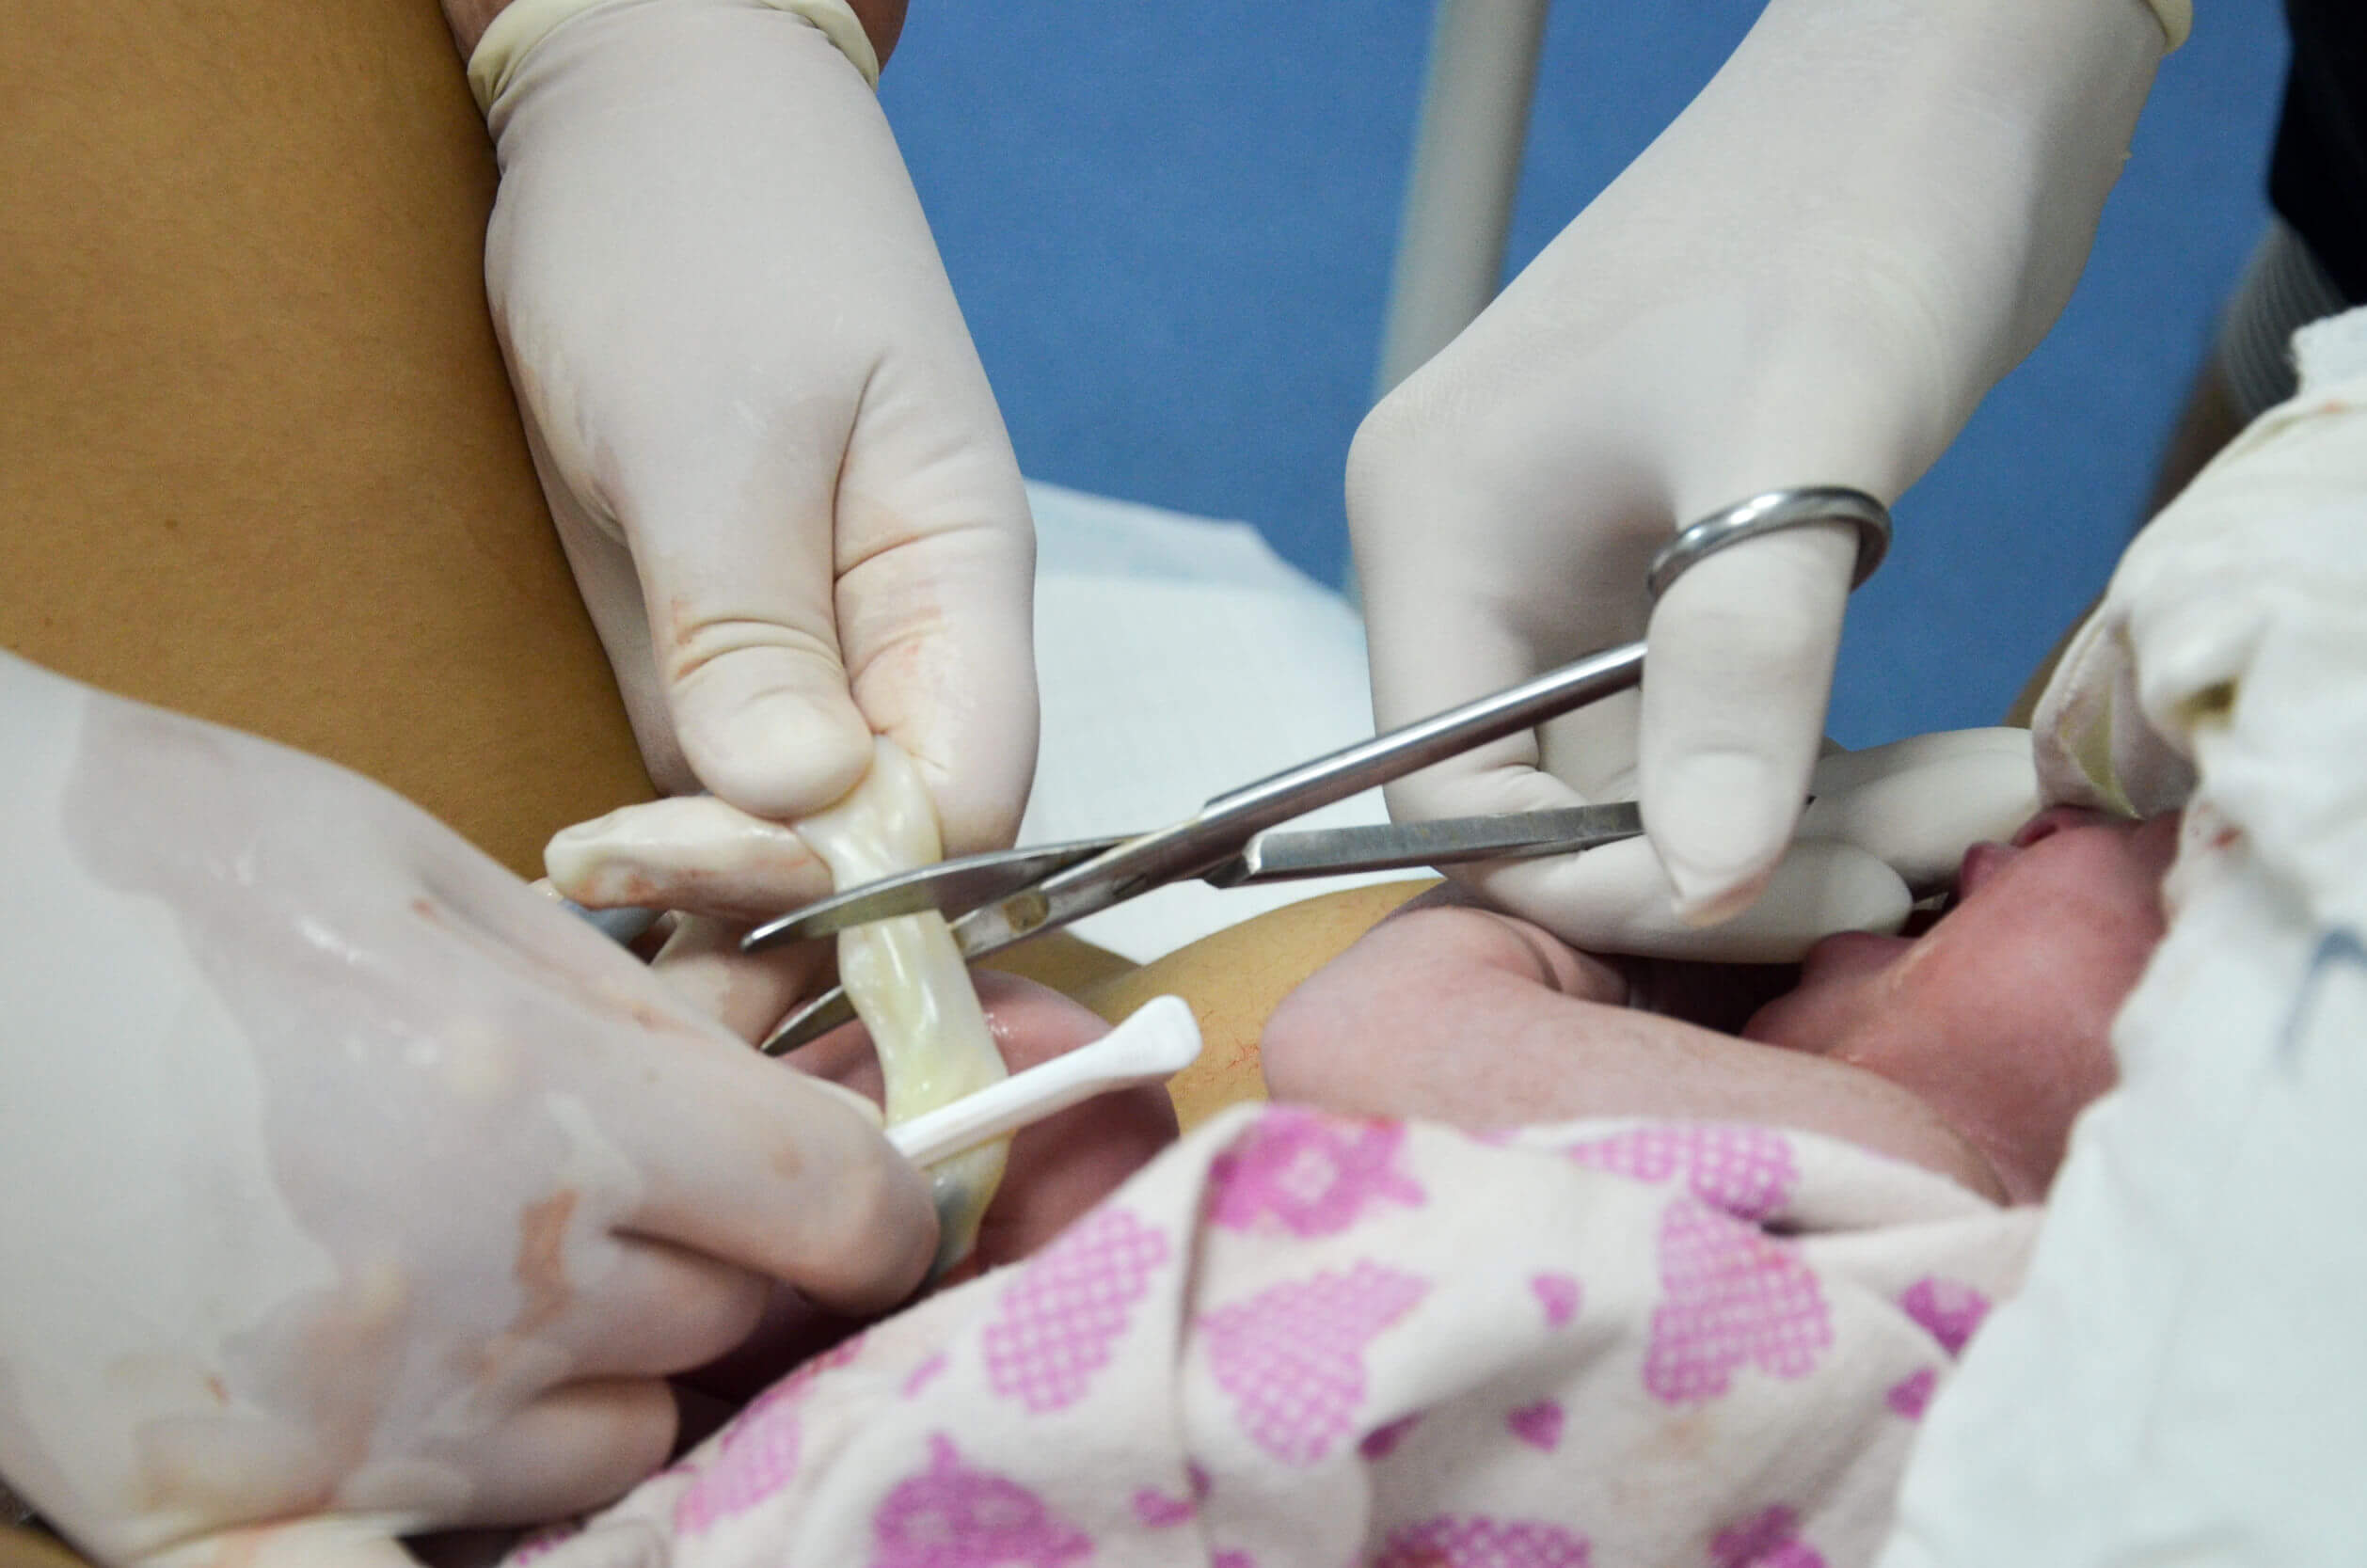 Doctors cutting the umbilical cord of a newborn.